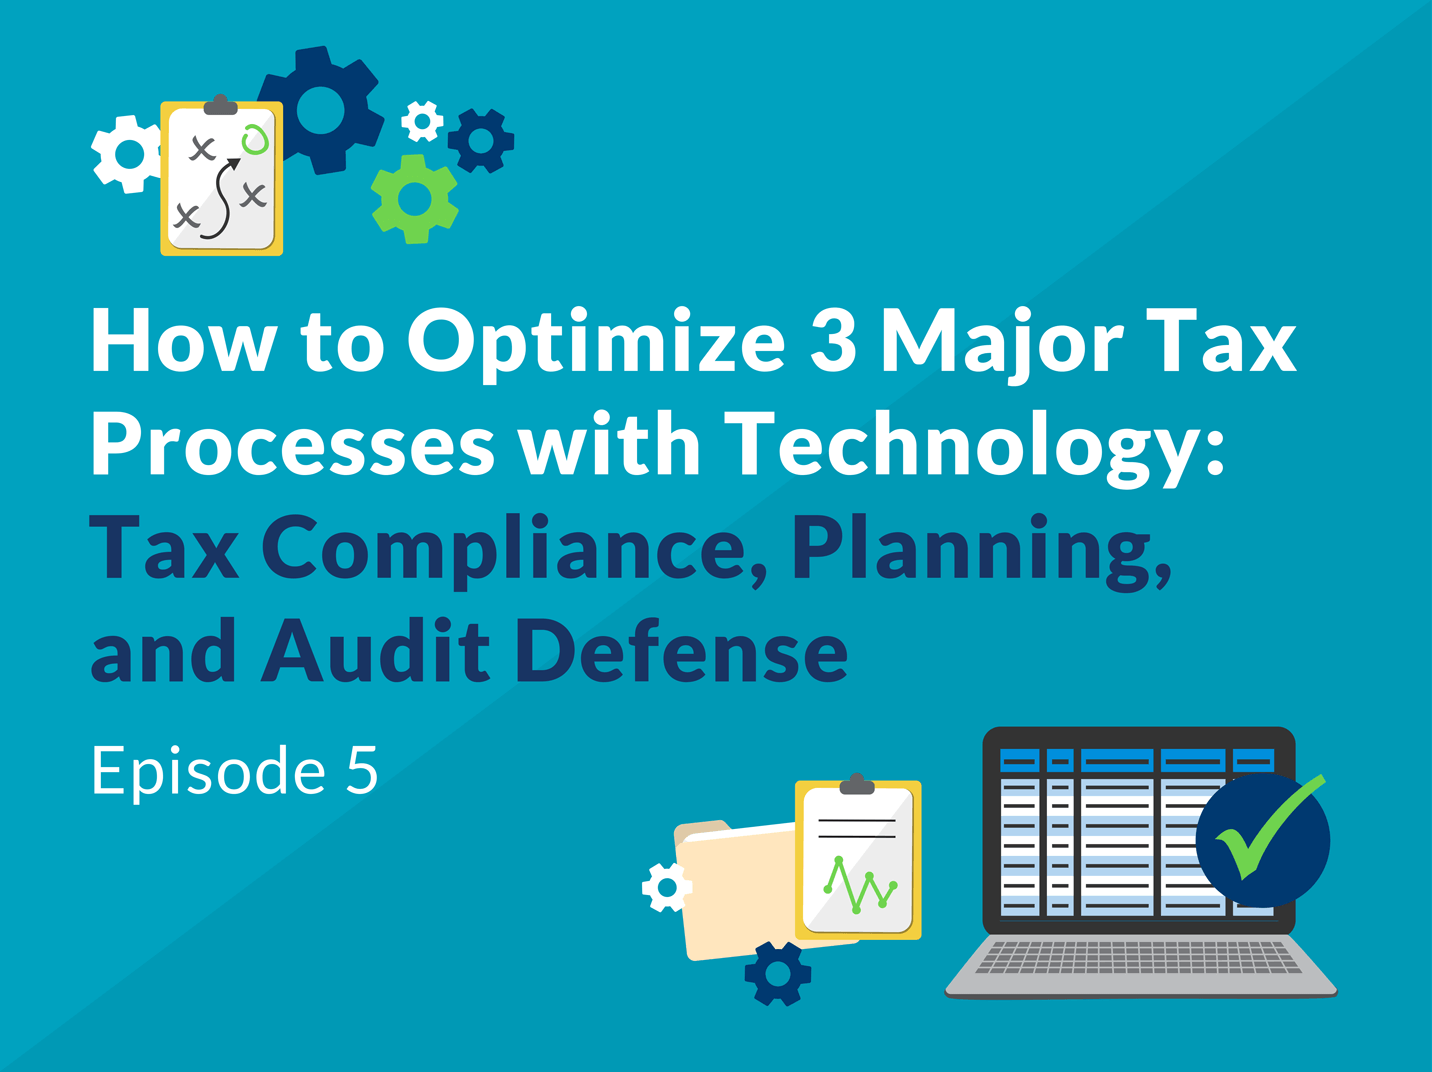 How to Optimize 3 Major Tax Processes with Technology